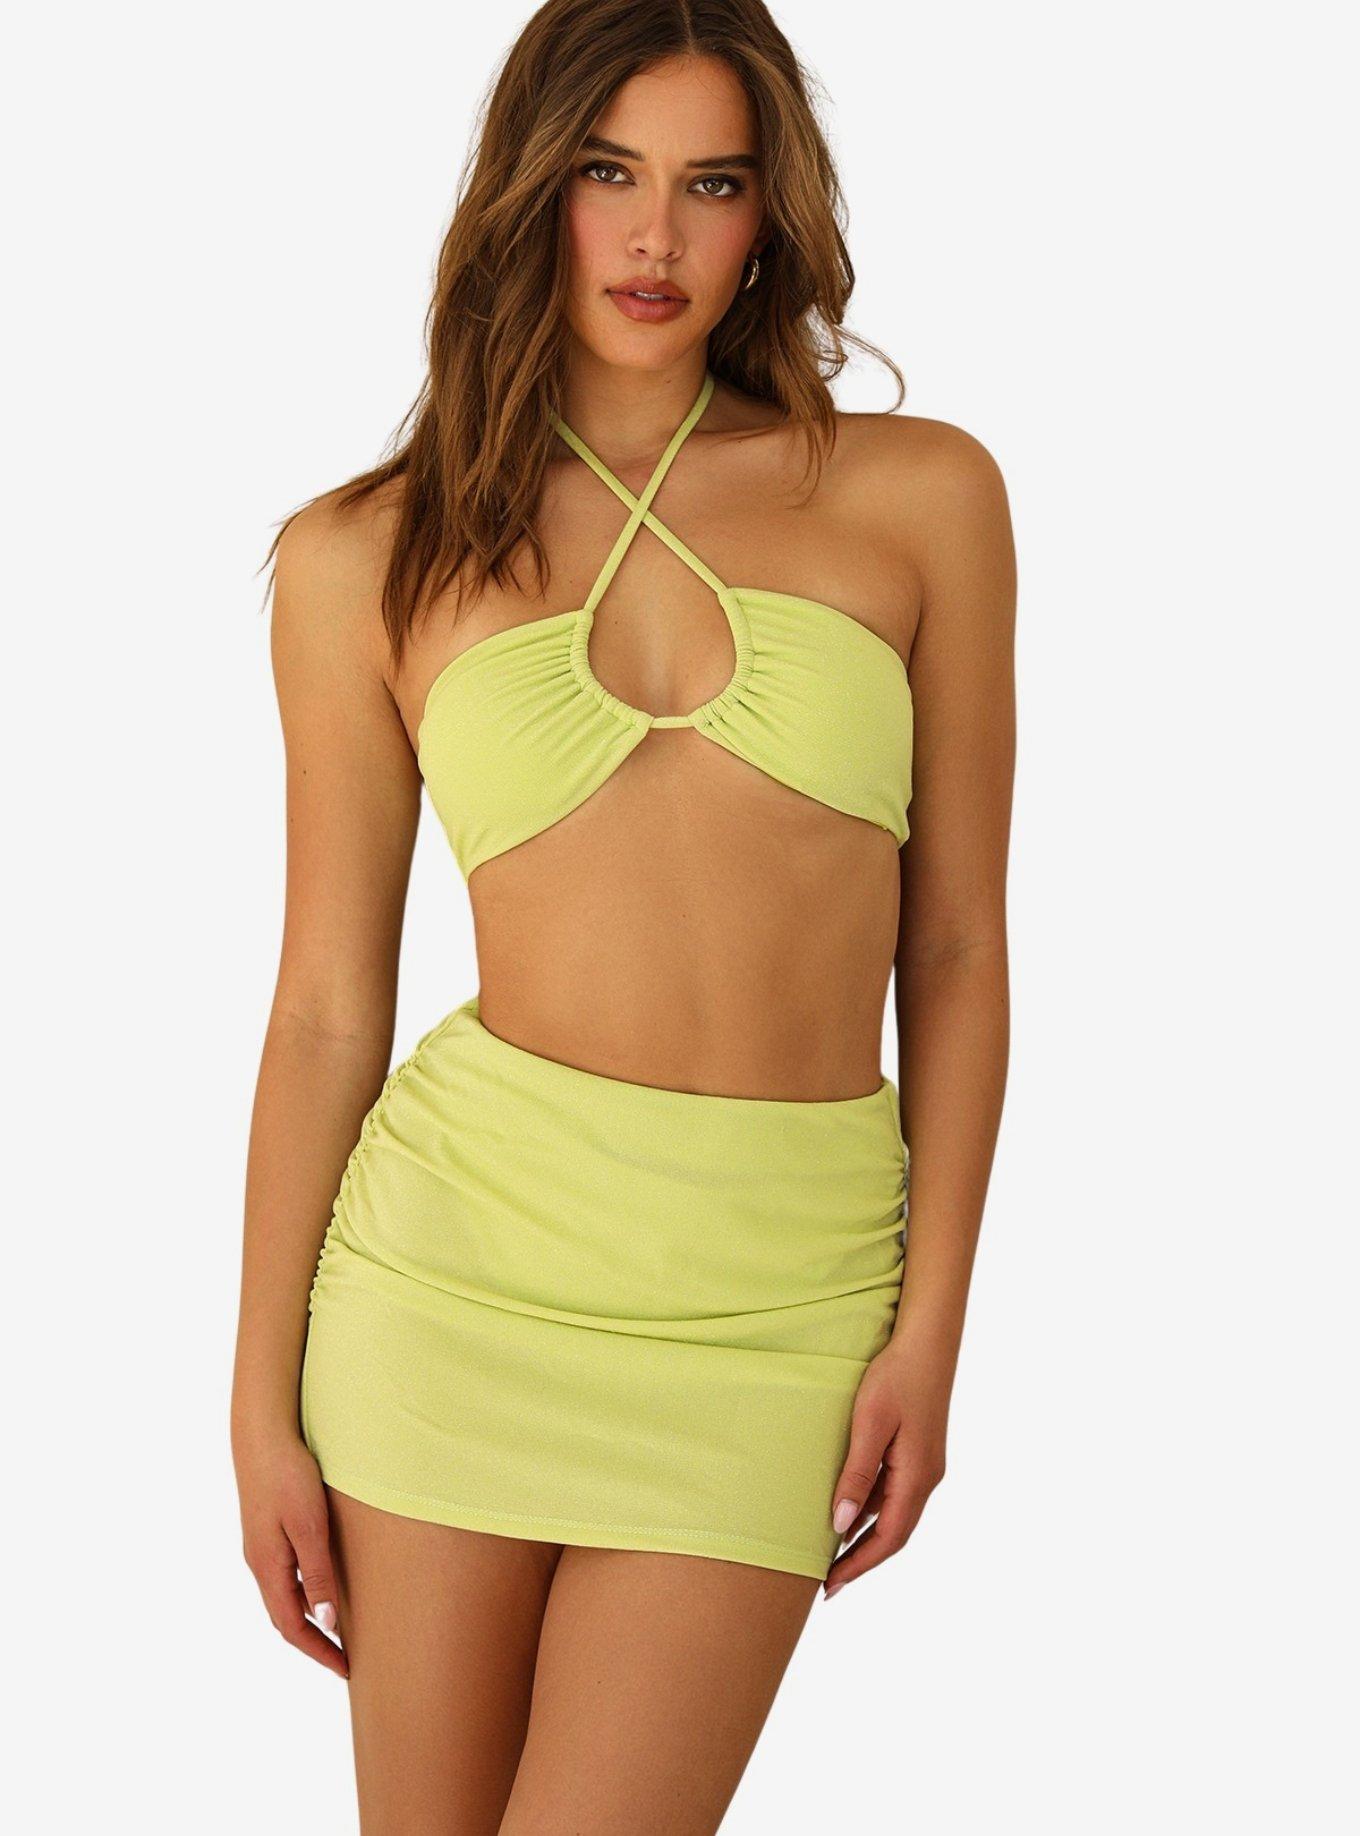 Dippin' Daisy's Lucky Swim Skirt Cover-Up Lime Green, GREEN, hi-res